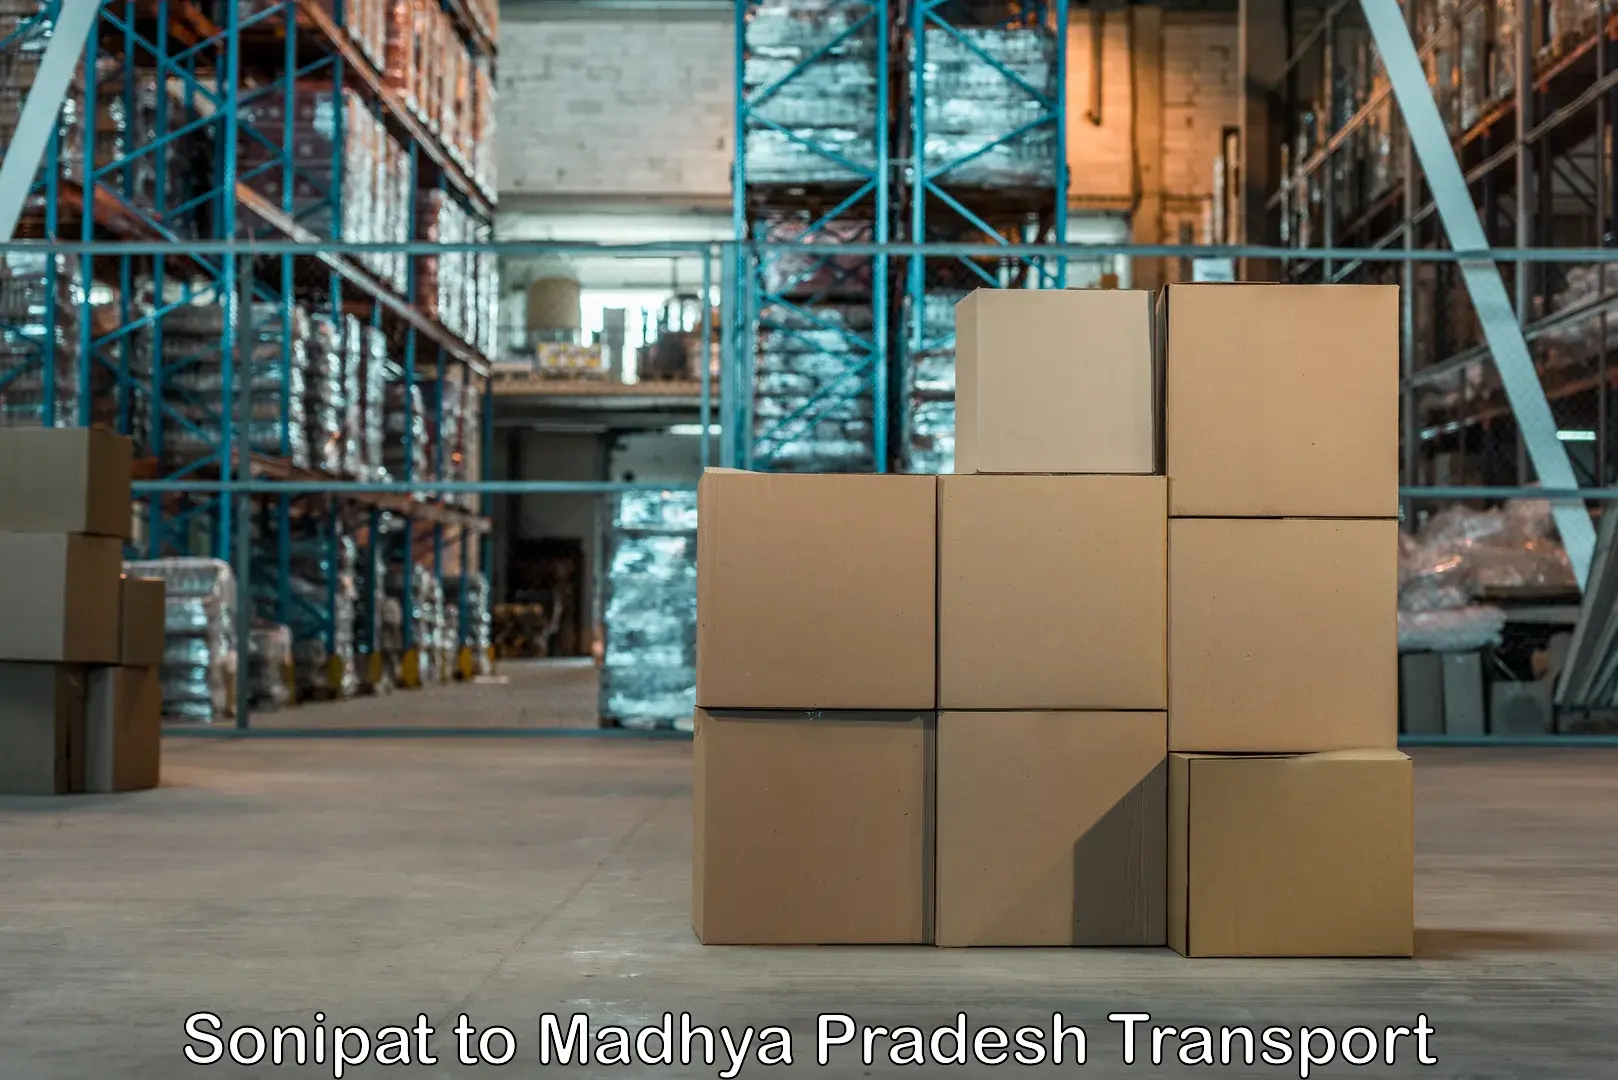 Container transport service Sonipat to Chanderi